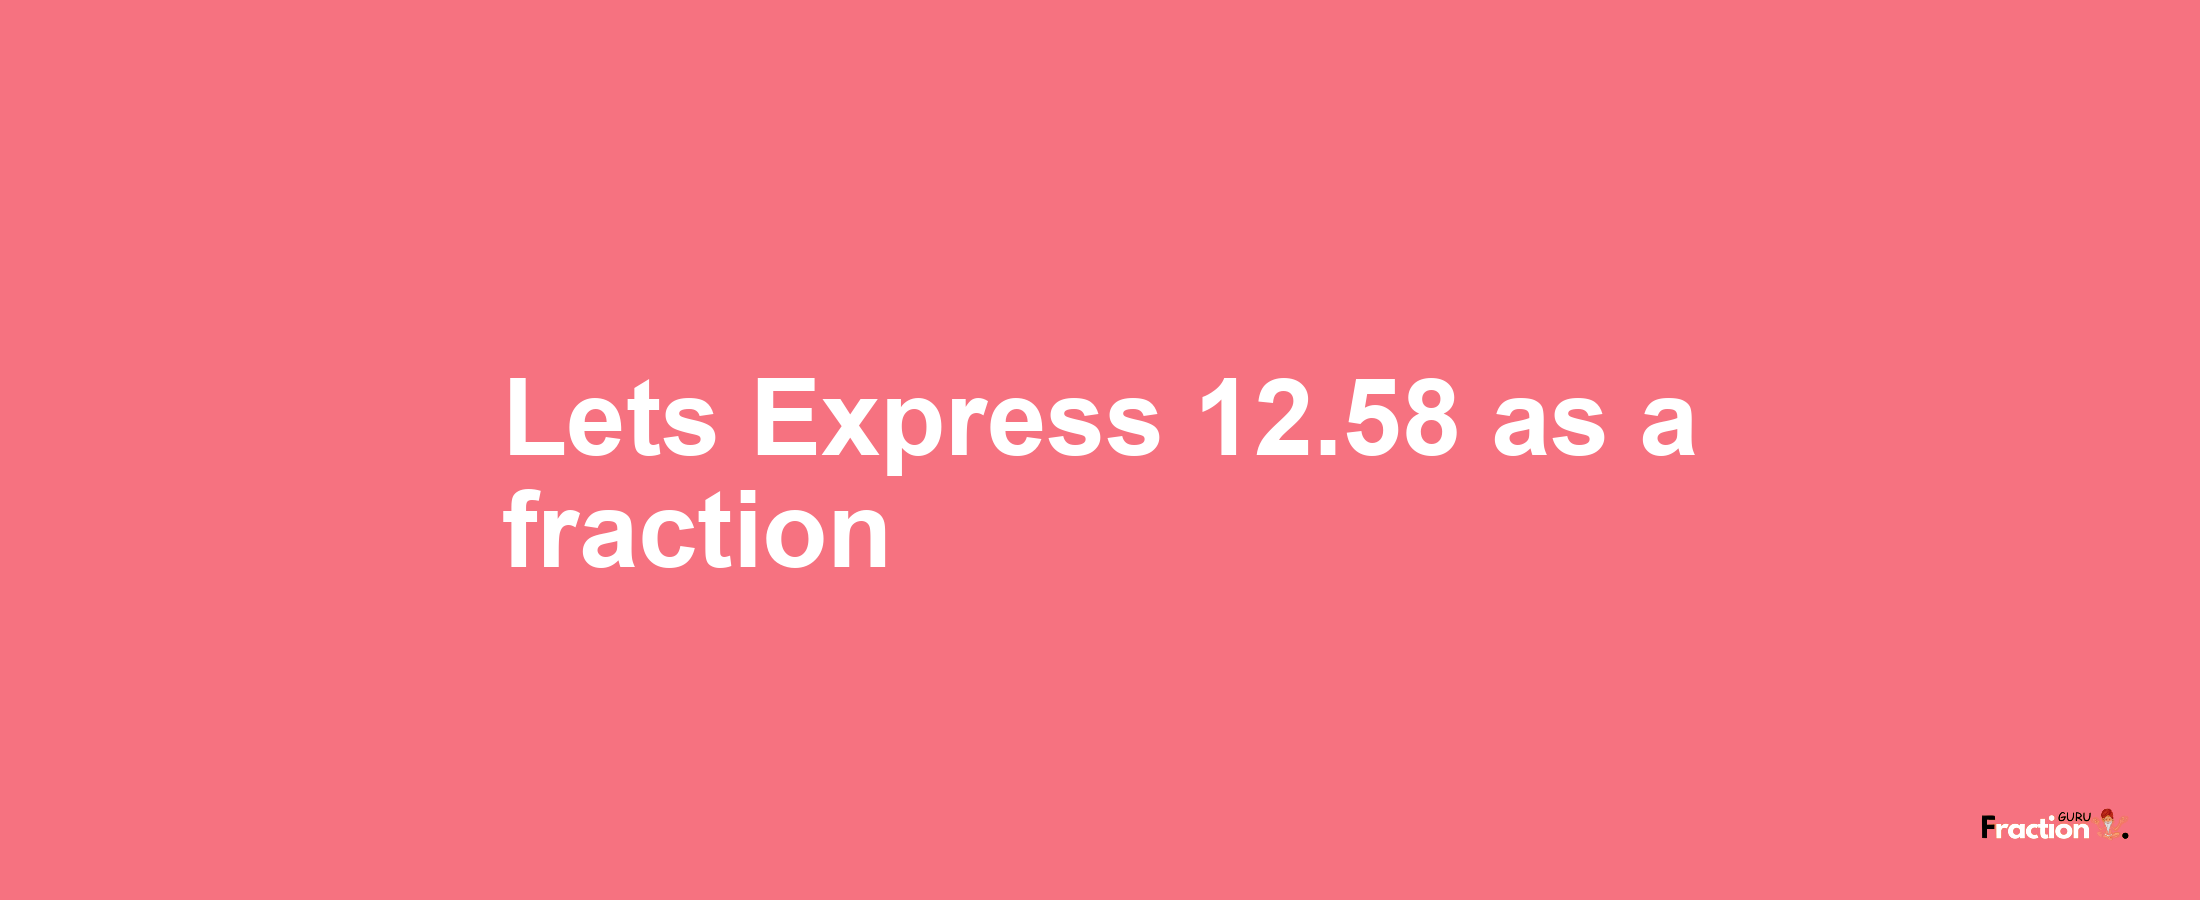 Lets Express 12.58 as afraction